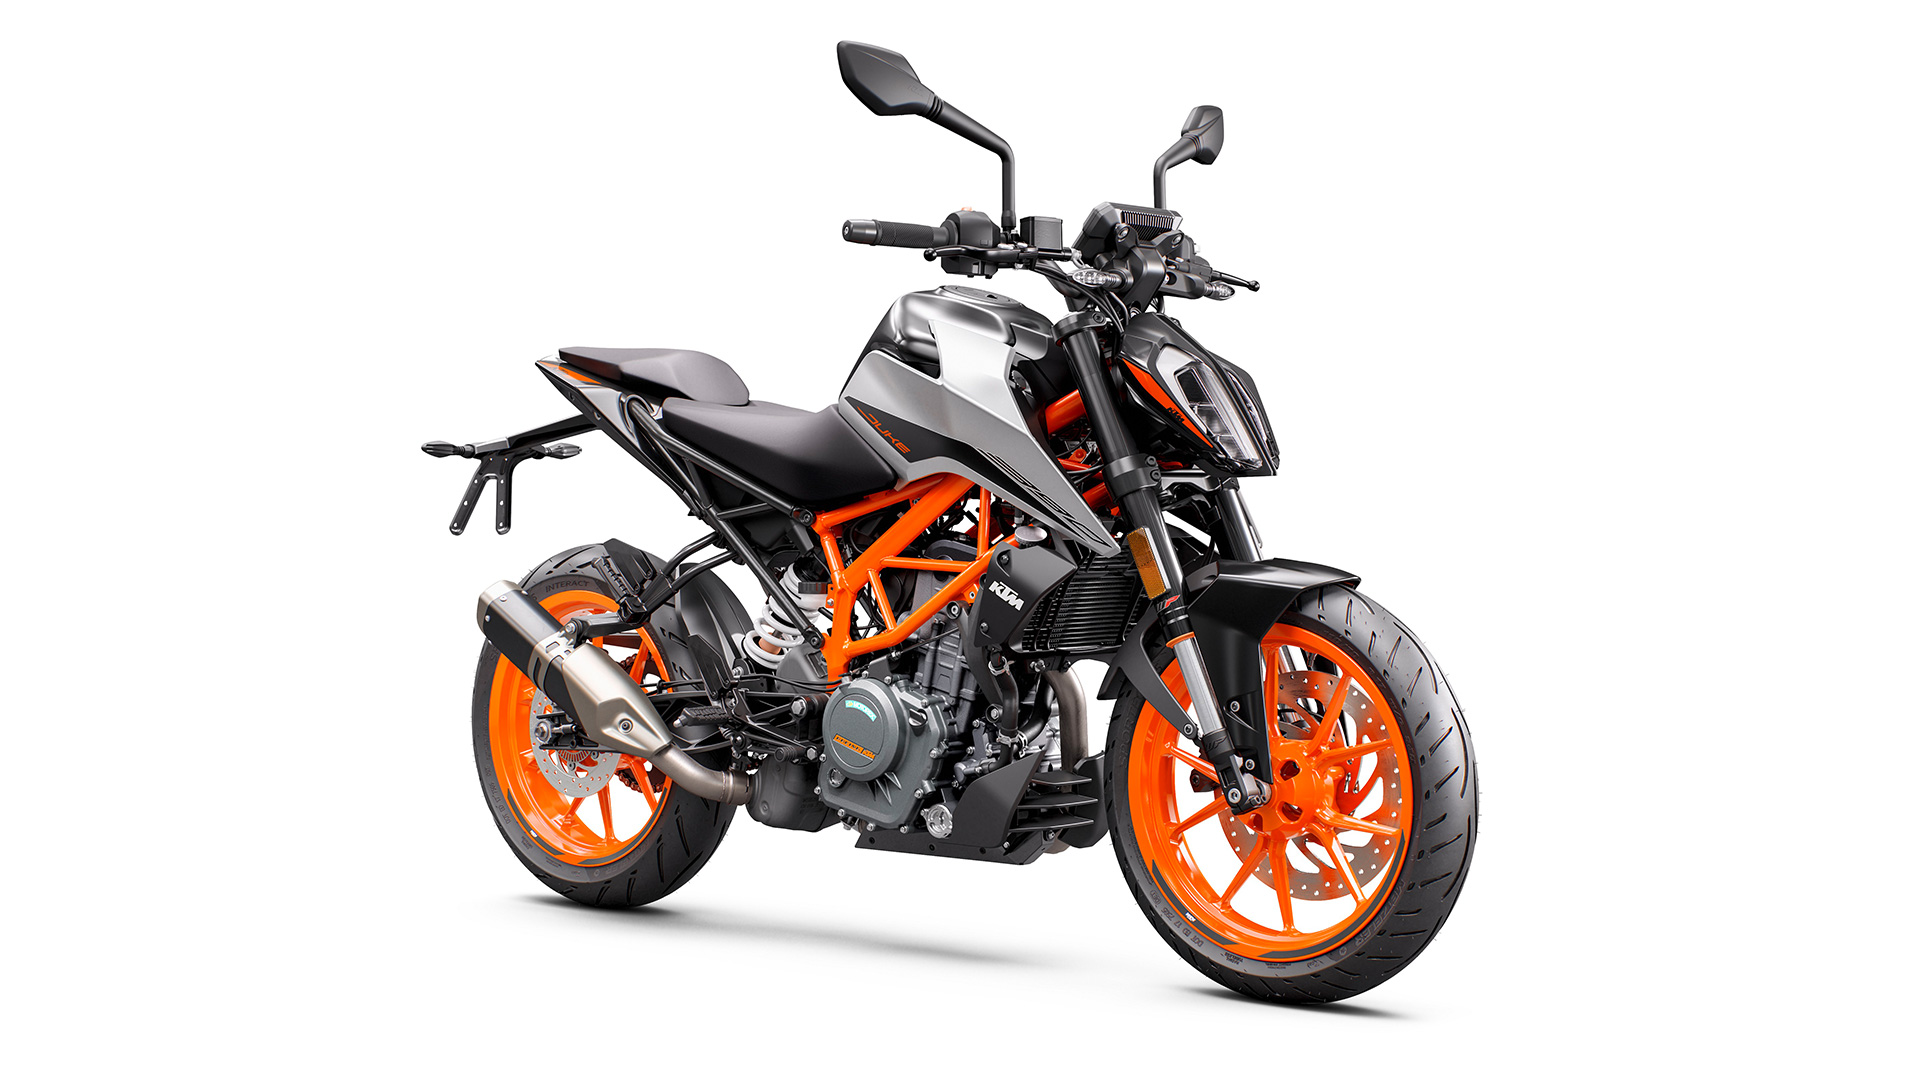 KTM 390 Duke 2020 - Price, Mileage, Reviews, Specification, Gallery